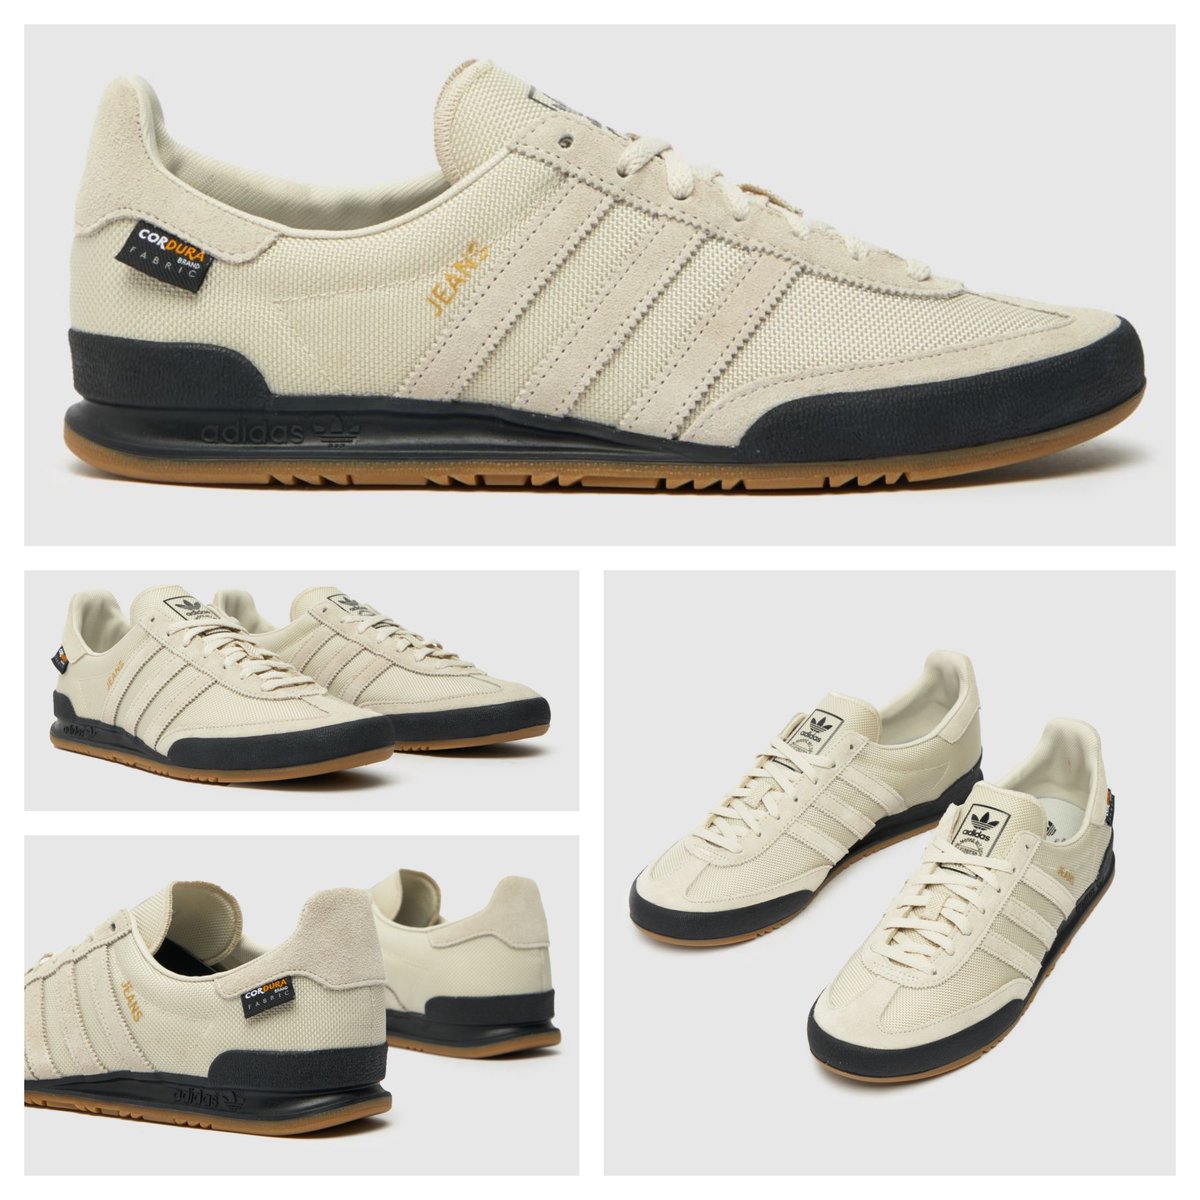 Man Savings Twitter: "Ad: New Release adidas 'Jeans Cordura' in a Beige colourway have dropped online. available here 🔗 https://t.co/4WRzIqgtB3 https://t.co/0yhyQJtnlE" / Twitter